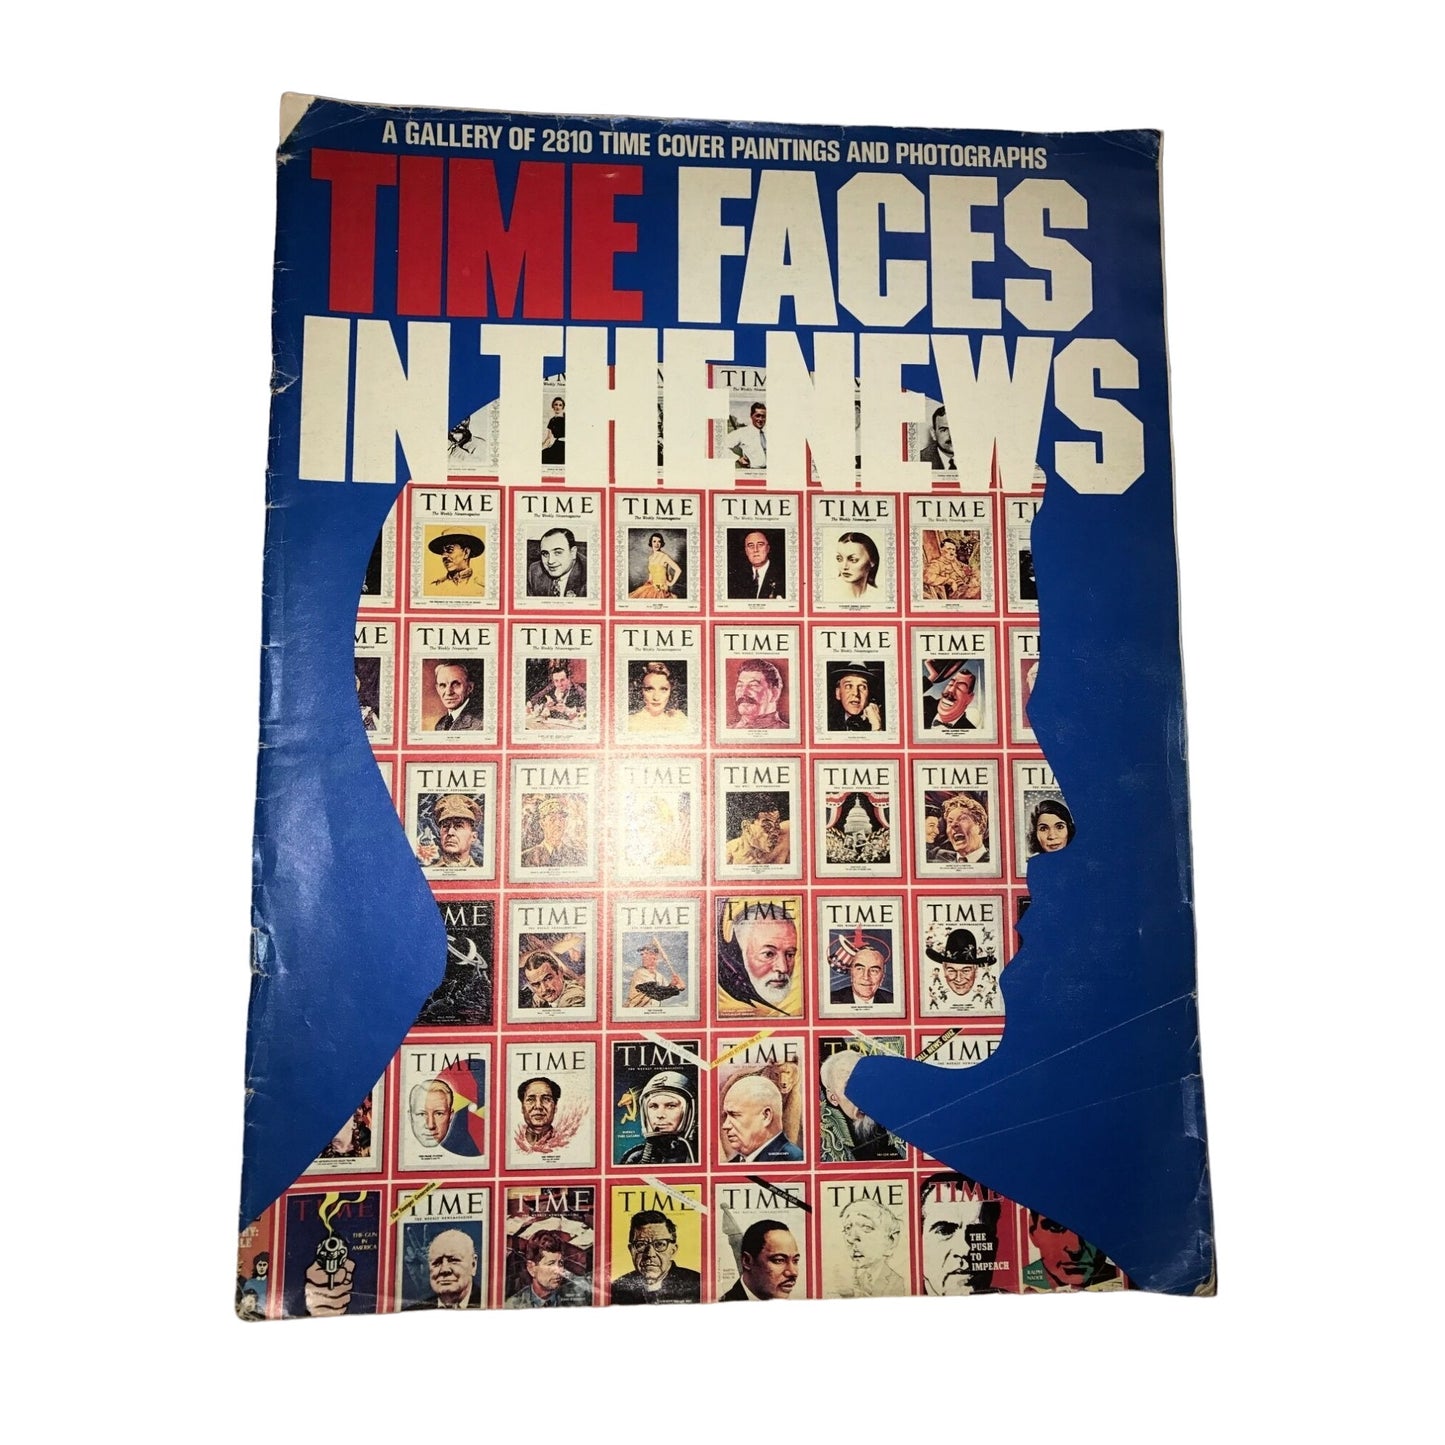 Time Faces In The News Magazine 1923-76 Gallery of 2810 Paintings and Photographs